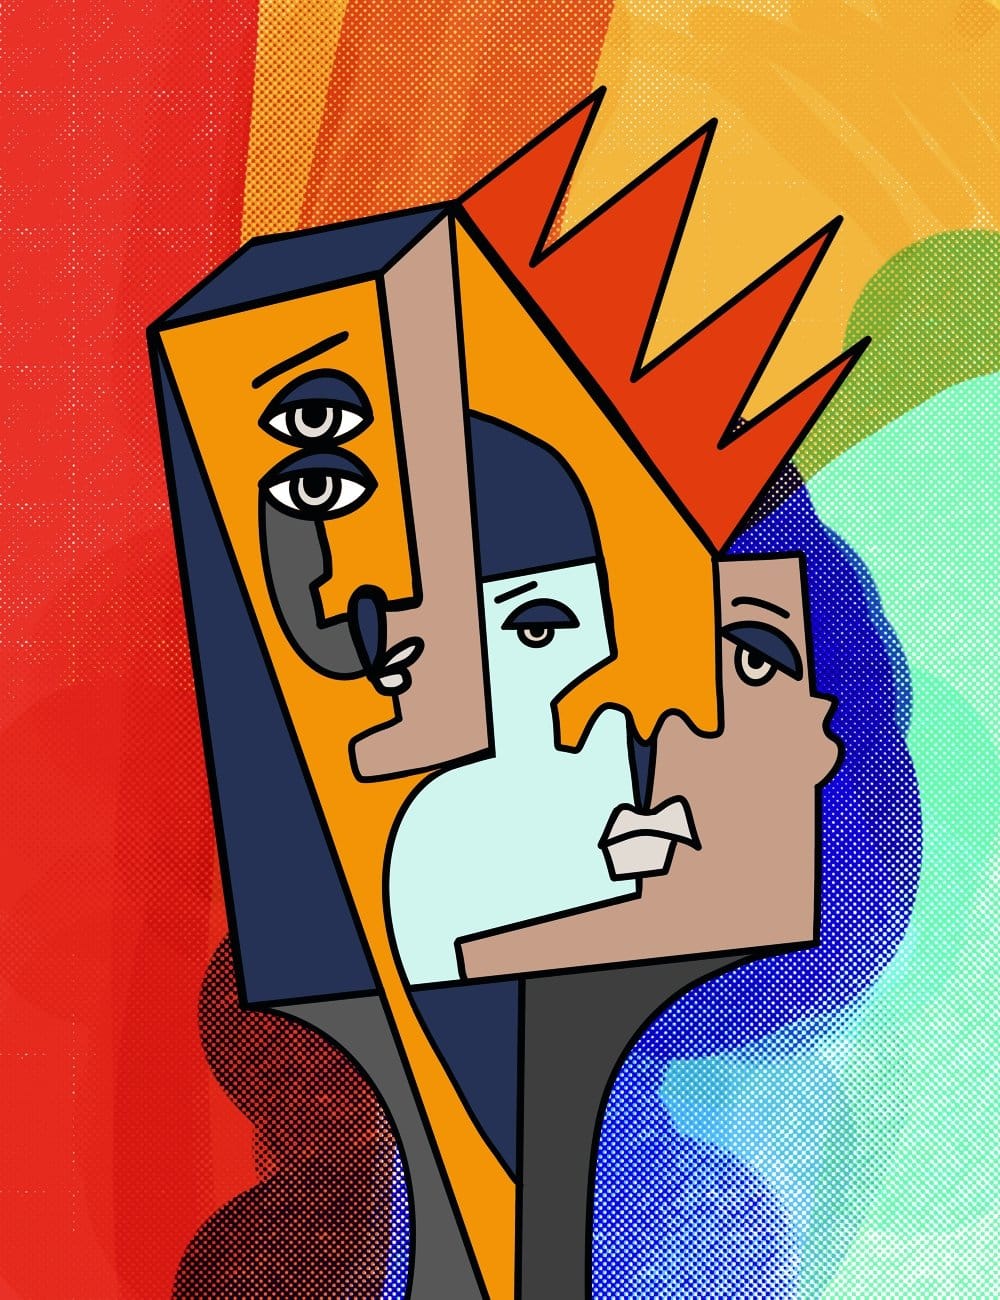 image of Upcoming NFT mint of a cubist piece of art NFT